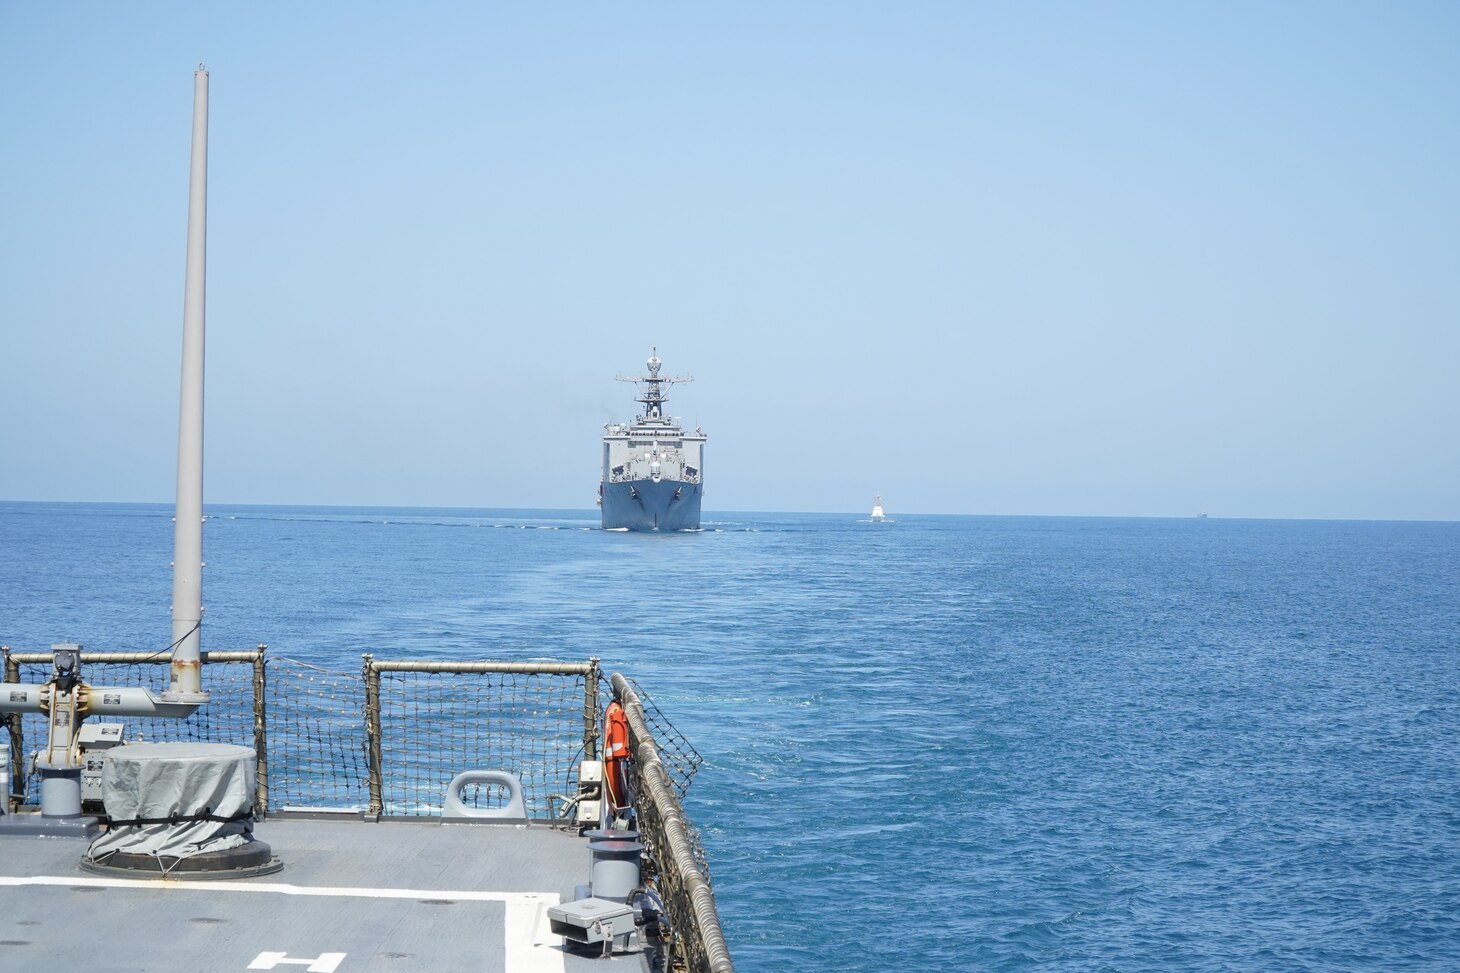 200622-N-NO901-1011 BLACK SEA (June 22, 2020) – USS Porter (DDG 78) and USS Oak Hill (LSD 51) execute maneuvering and air defense exercises with GCG Ochamchire (P-23) and GCG Dioskura (P-25) in the Black Sea, June 22, 2020. Porter, forward-deployed to Rota, Spain, is on its eighth patrol in the U.S. 6th Fleet area of operations in support of U.S. national security interests in Europe and Africa. (U.S. Navy photo by Interior Communication Electrician 2nd Class Jeffrey Abelon/Released)